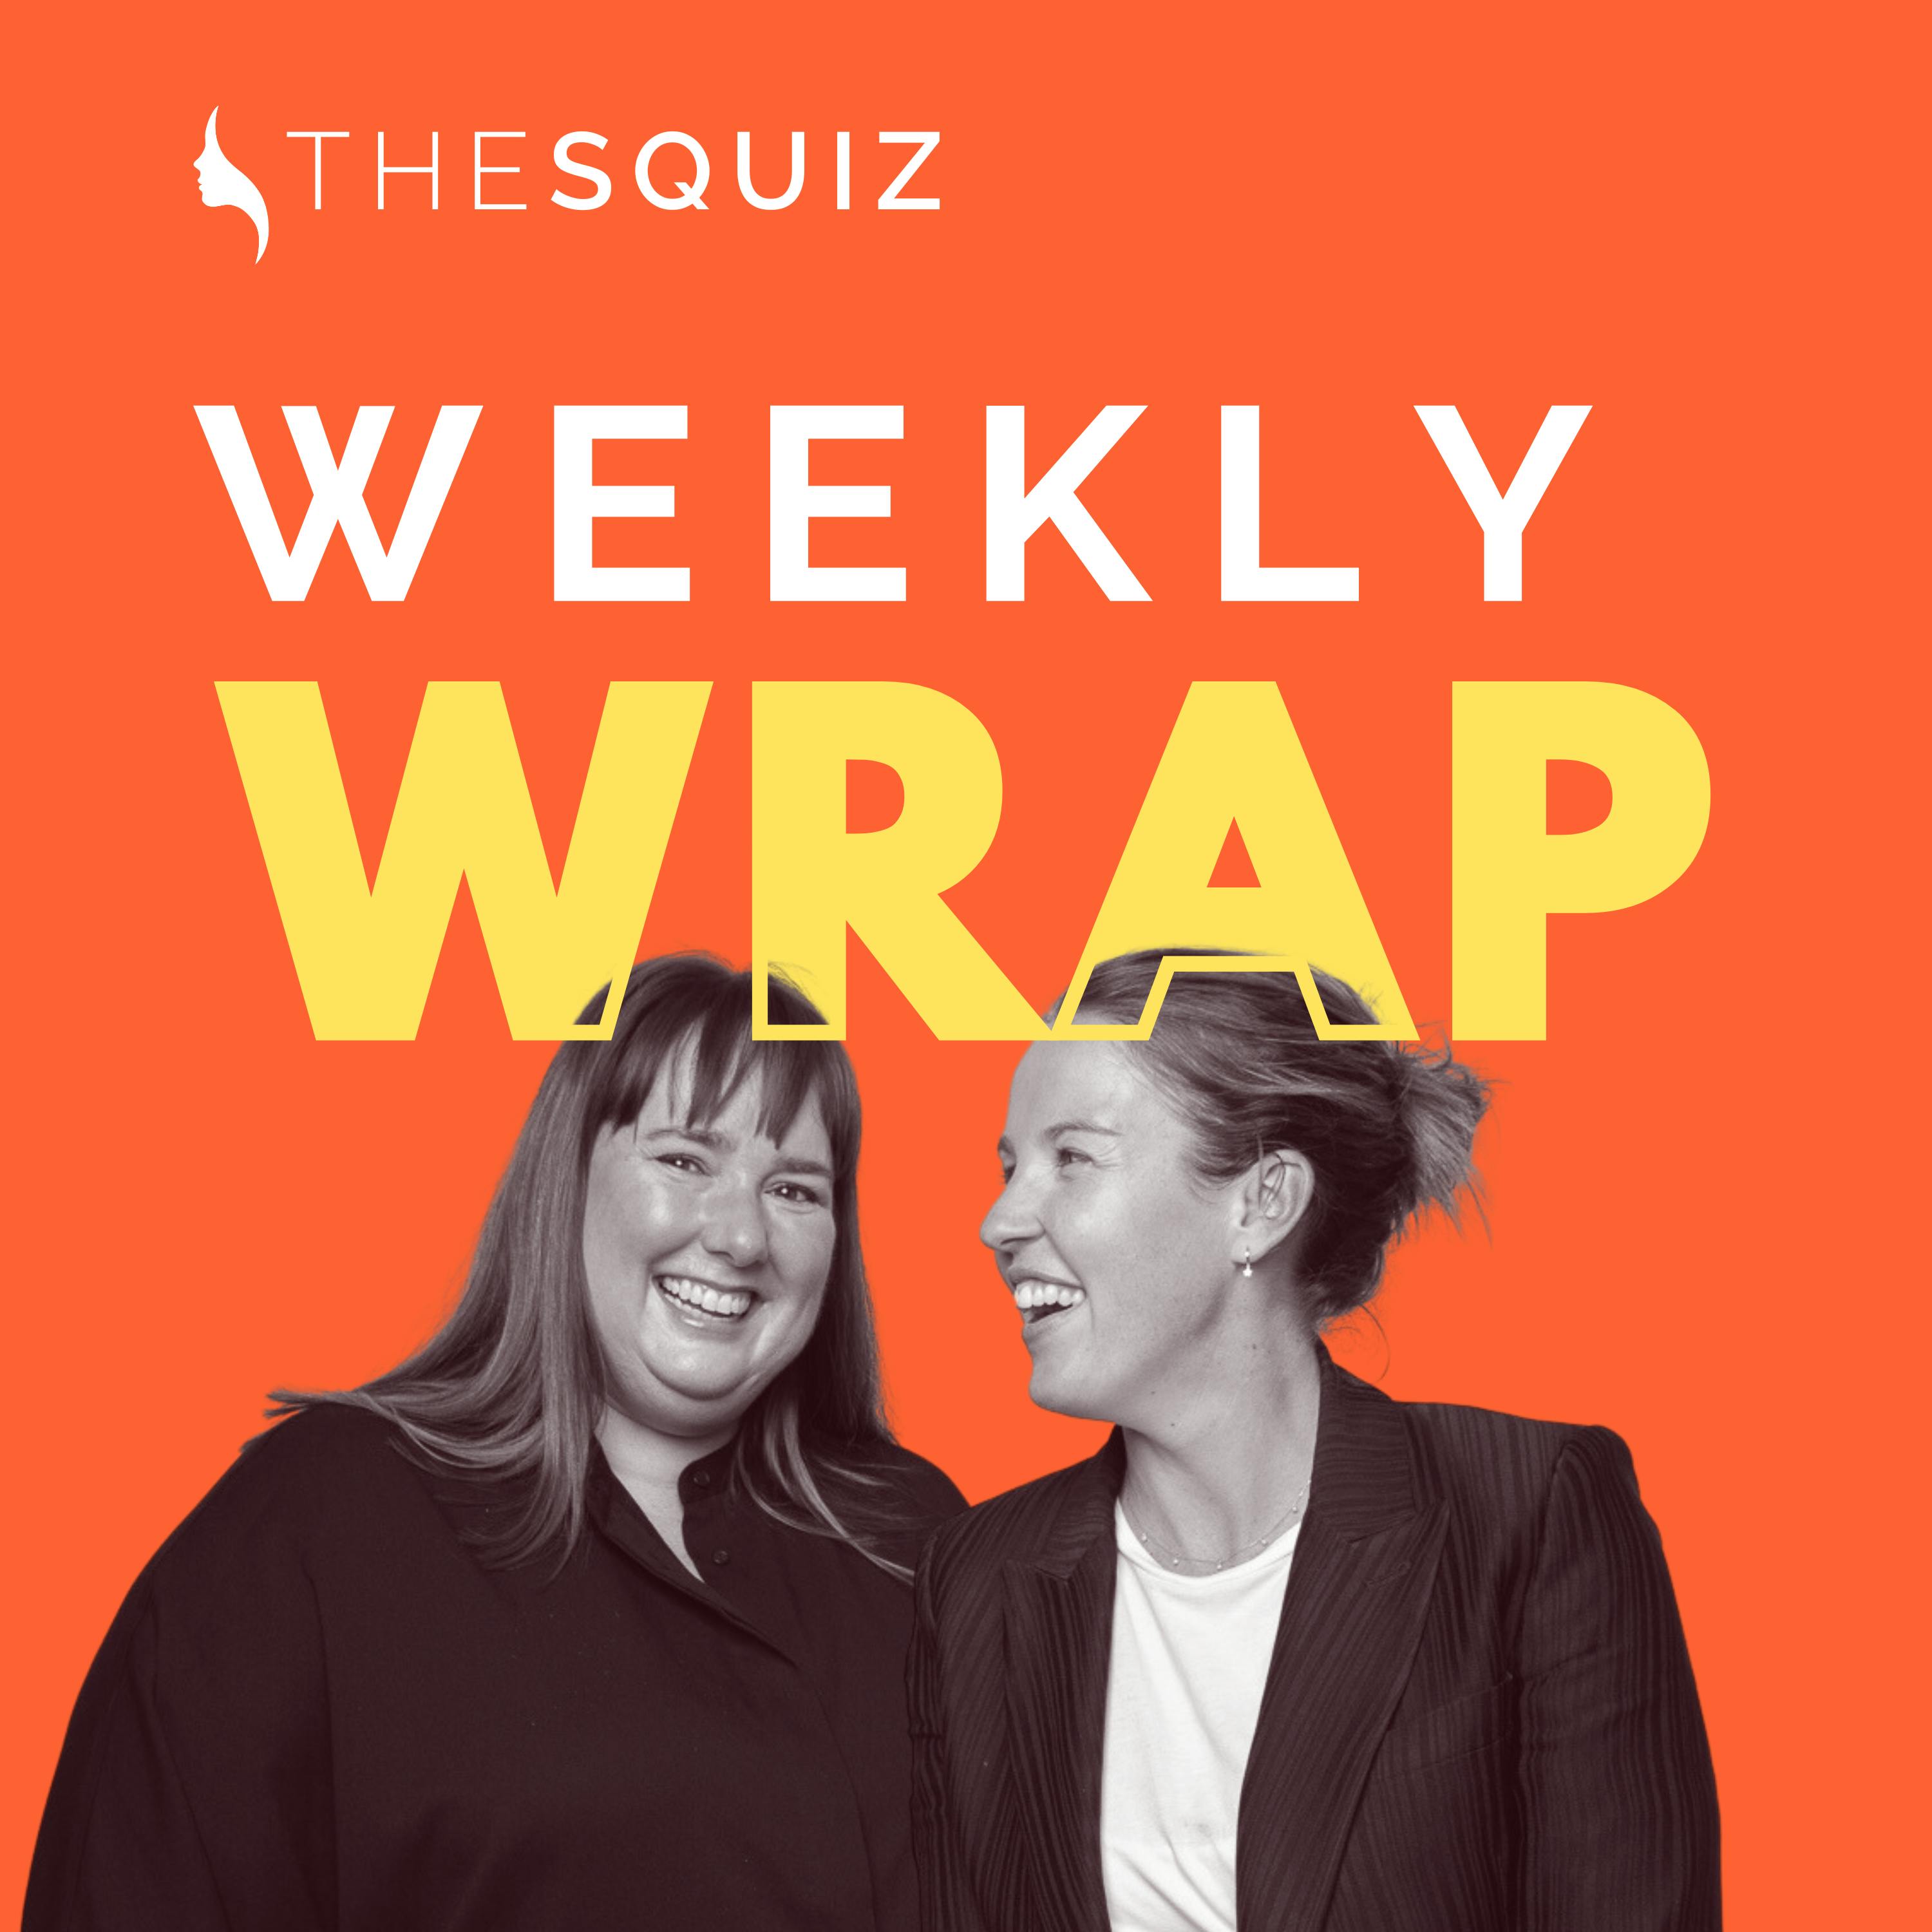 Weekly Wrap: Swifties tackle AI deepfakes, changes to tax cuts, and a Sydney shark attack...